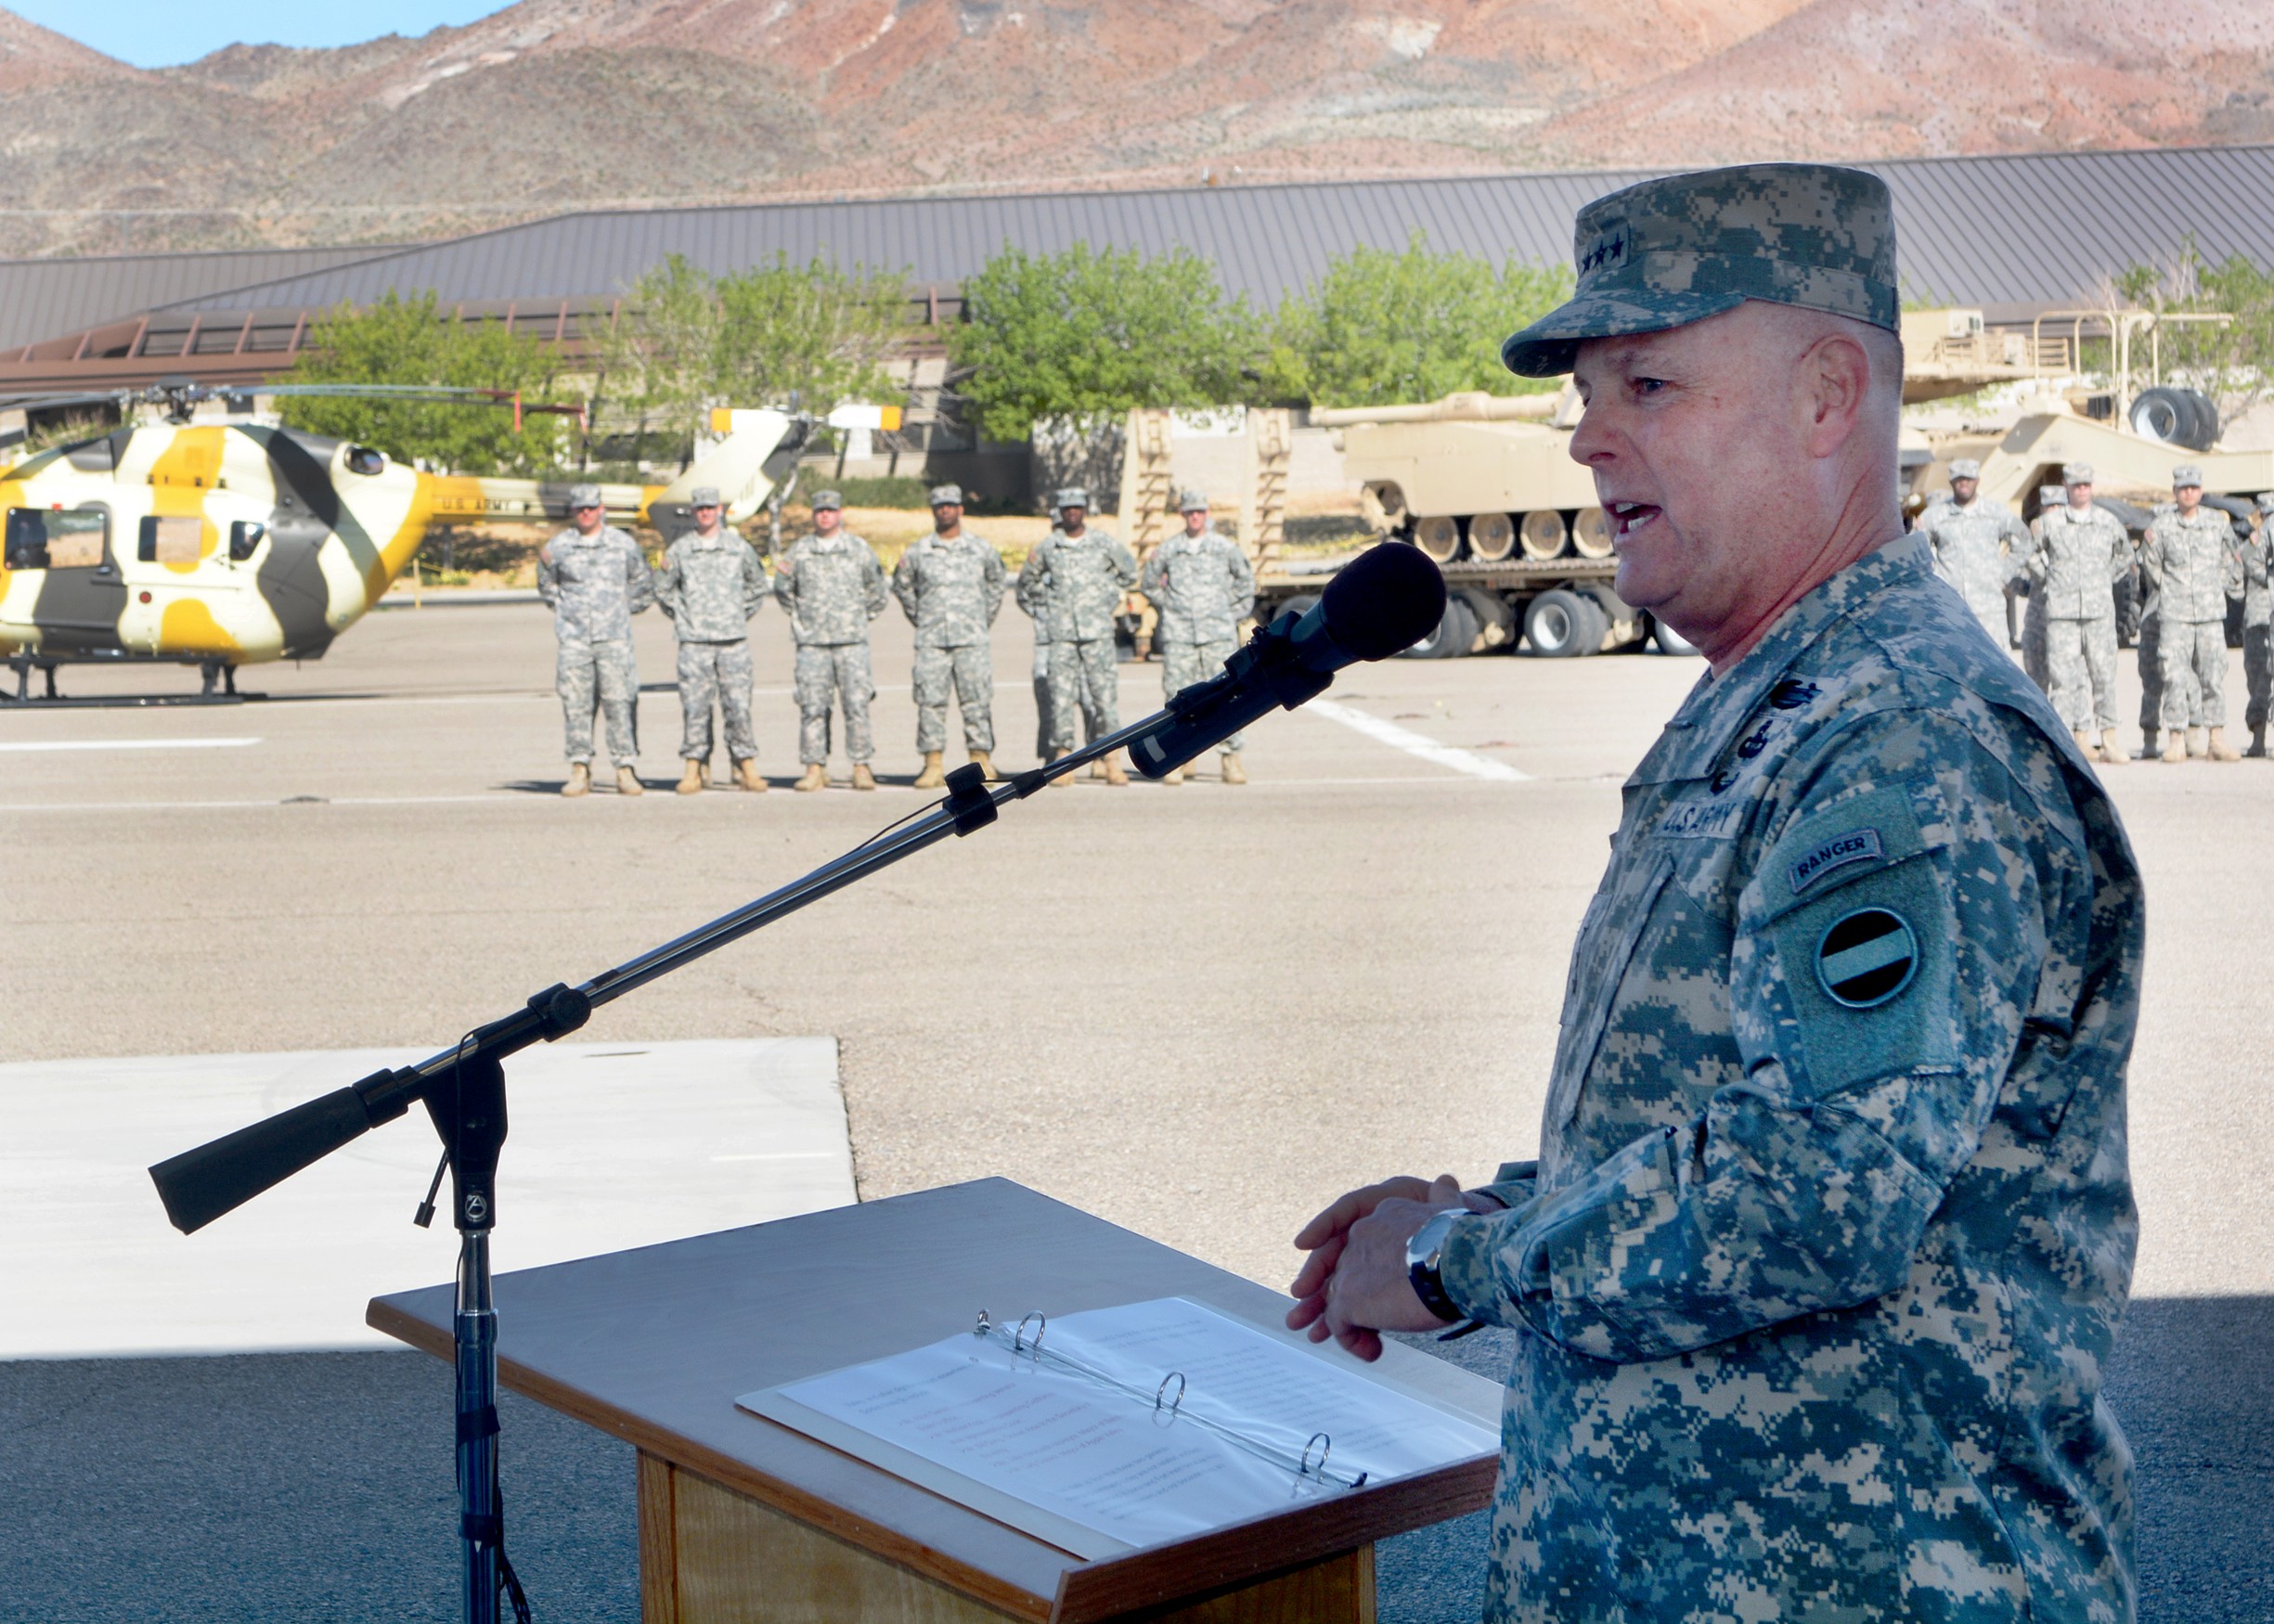 New commander at helm of NTC, Fort Irwin Article The United States Army